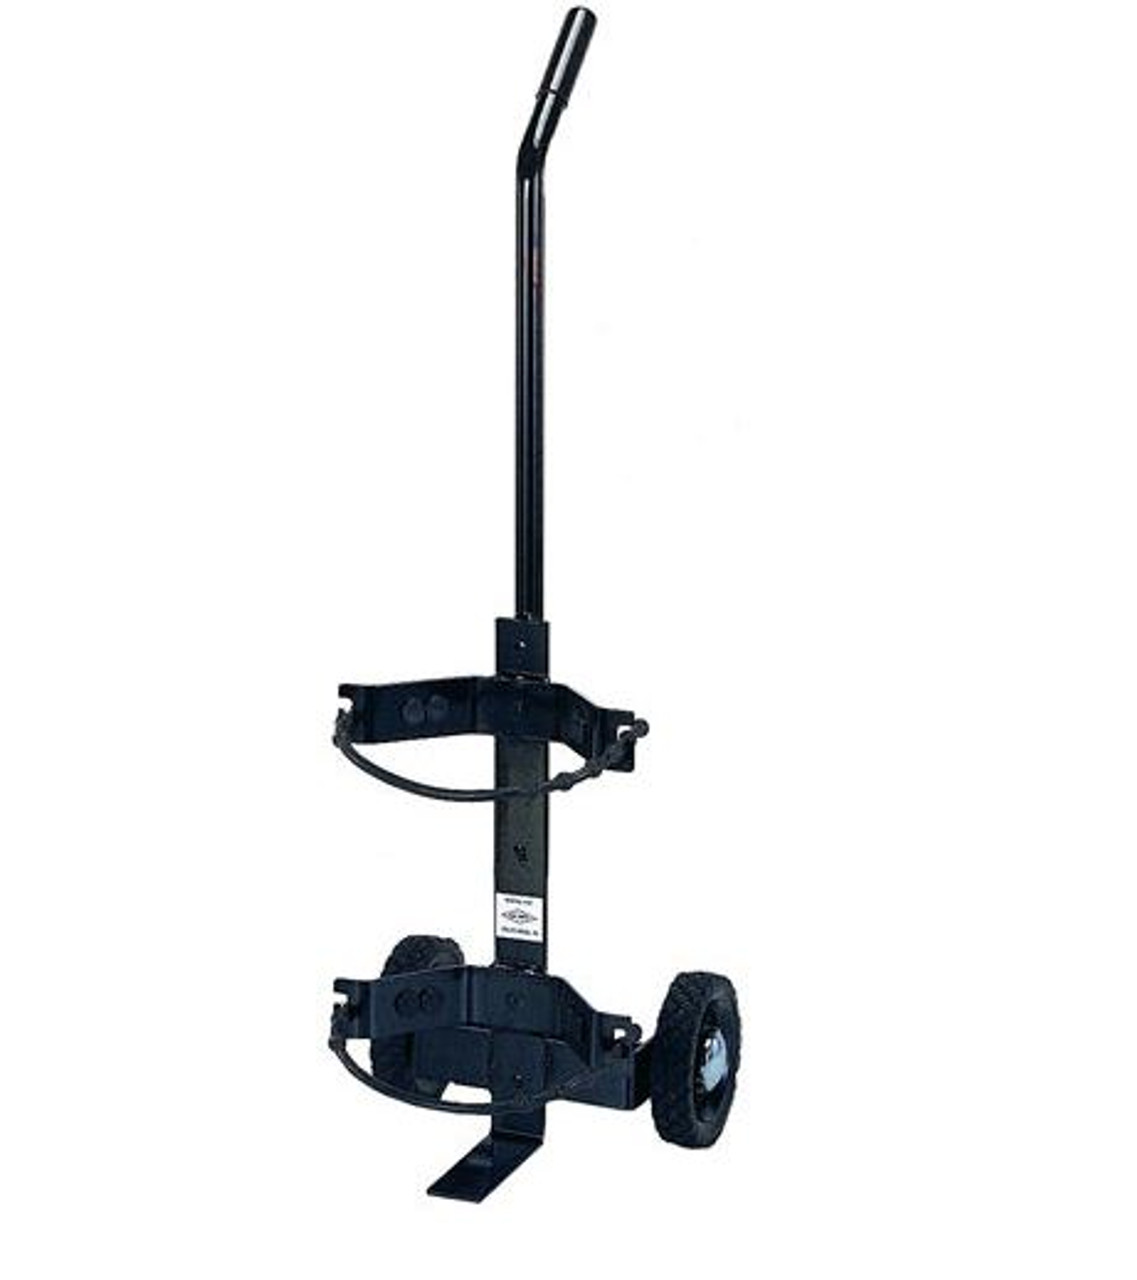 Amerex 859 - Heavy Duty Fire Extinguisher Dolly Cart with Rubber Straps